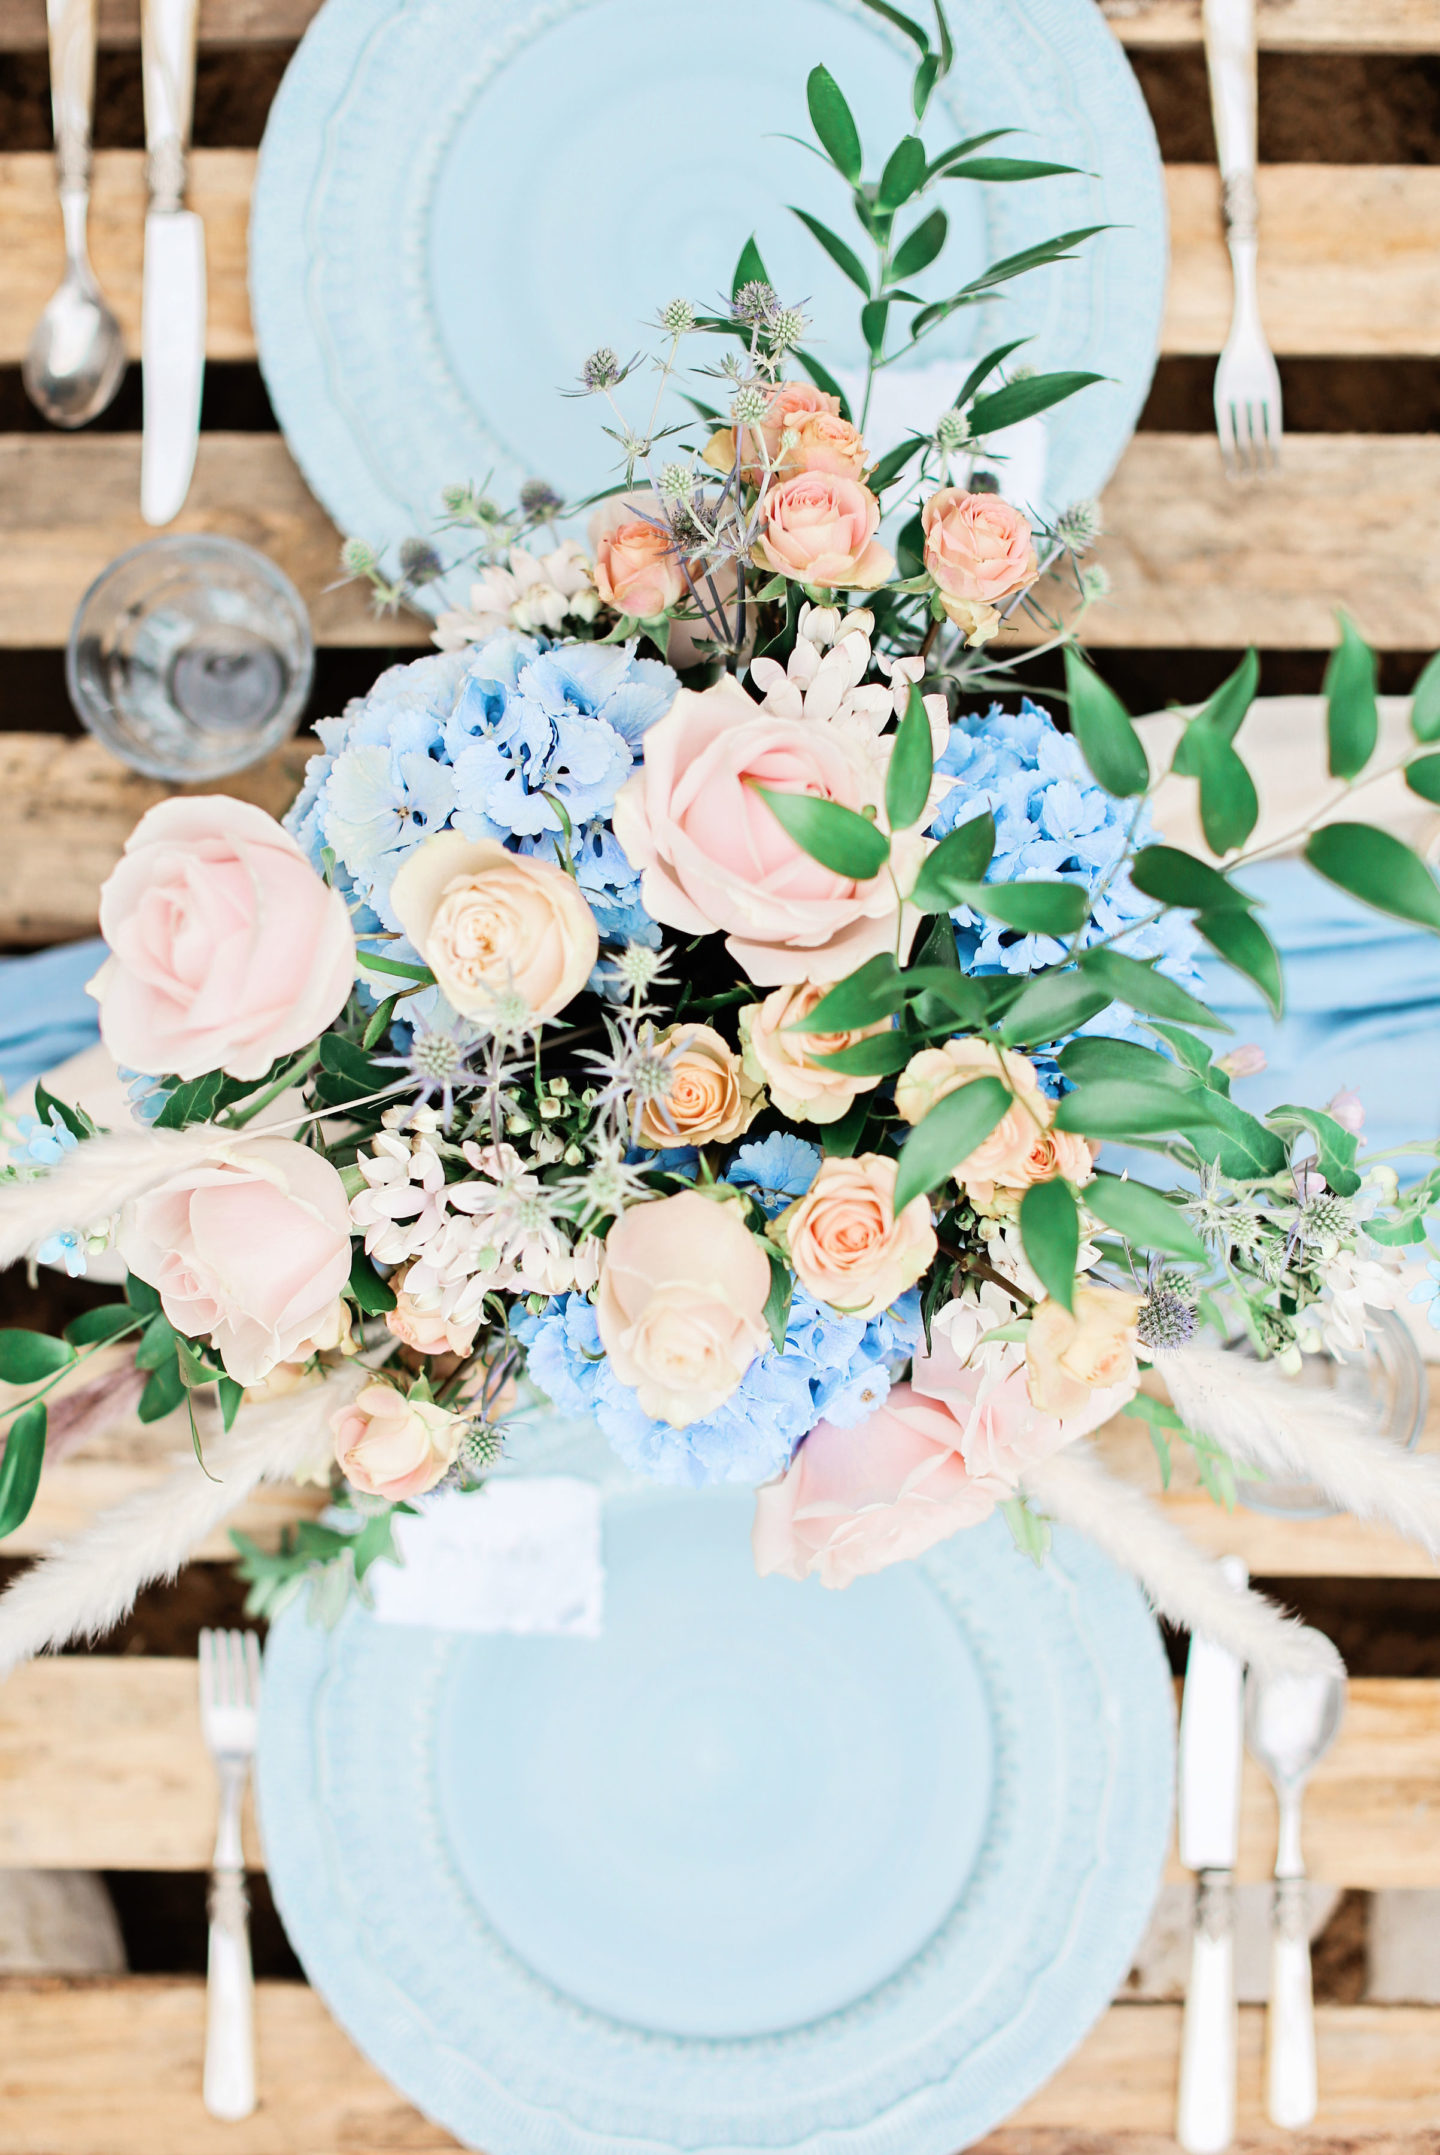 2021 Styling Trends: Top 7 New Year Wedding Styling Trends